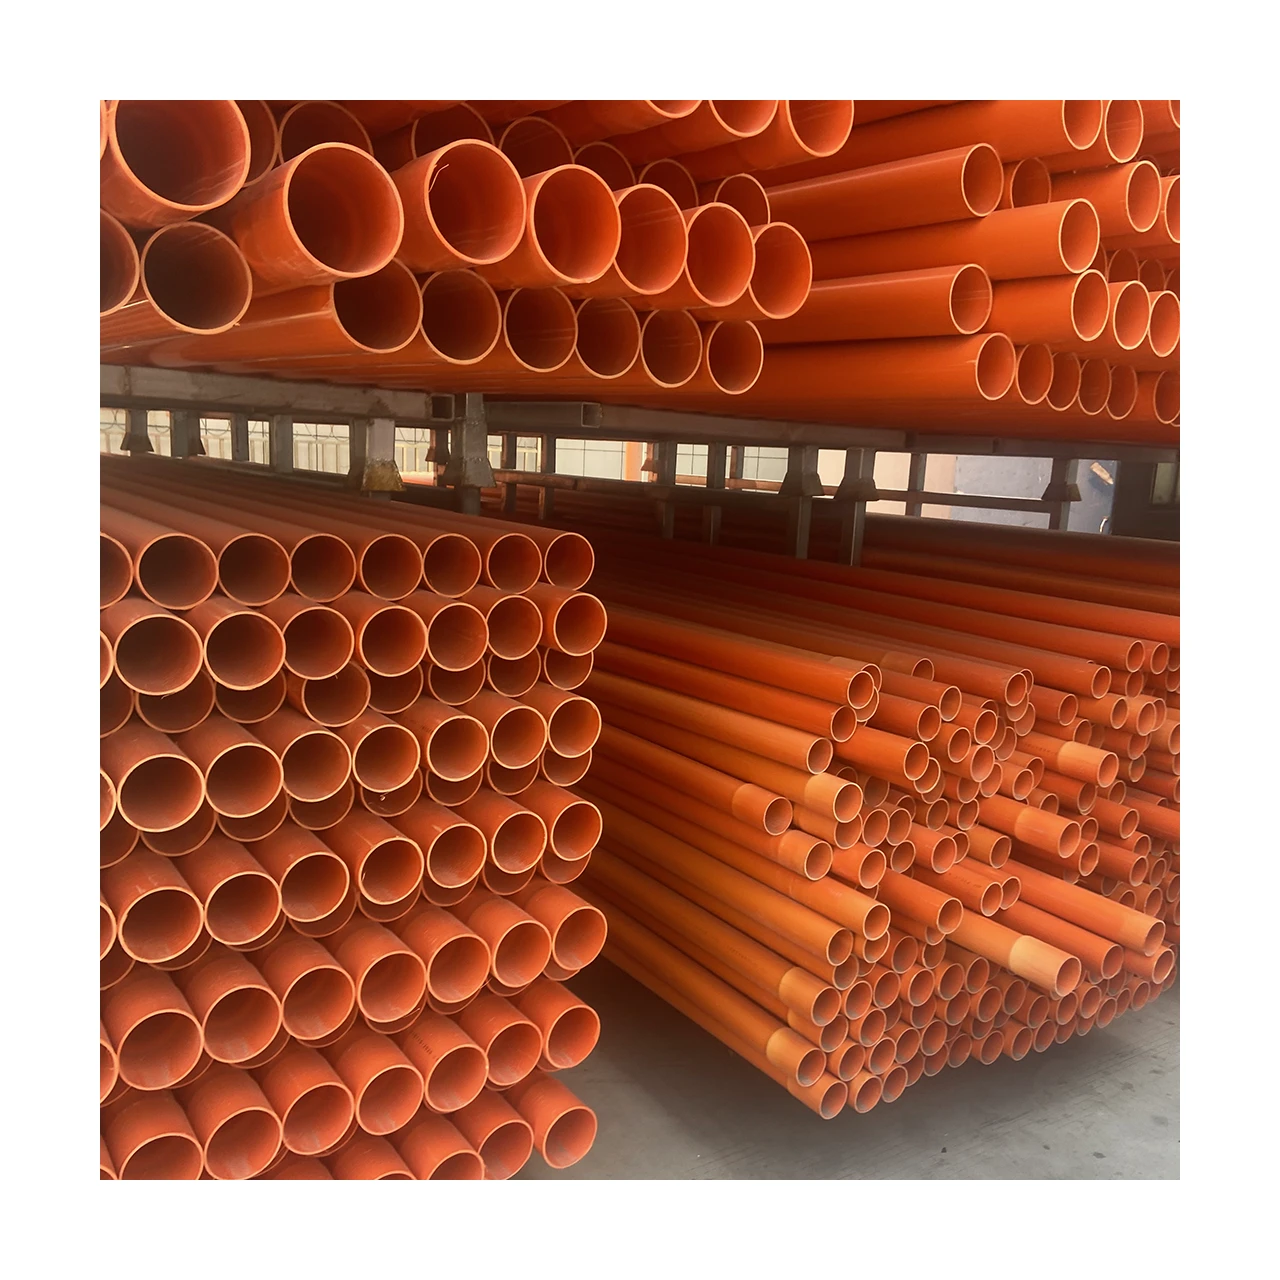 electrical conduit pipes types of pvc pipe a 2000 pvc drainage 5 inch pvc-u pipe